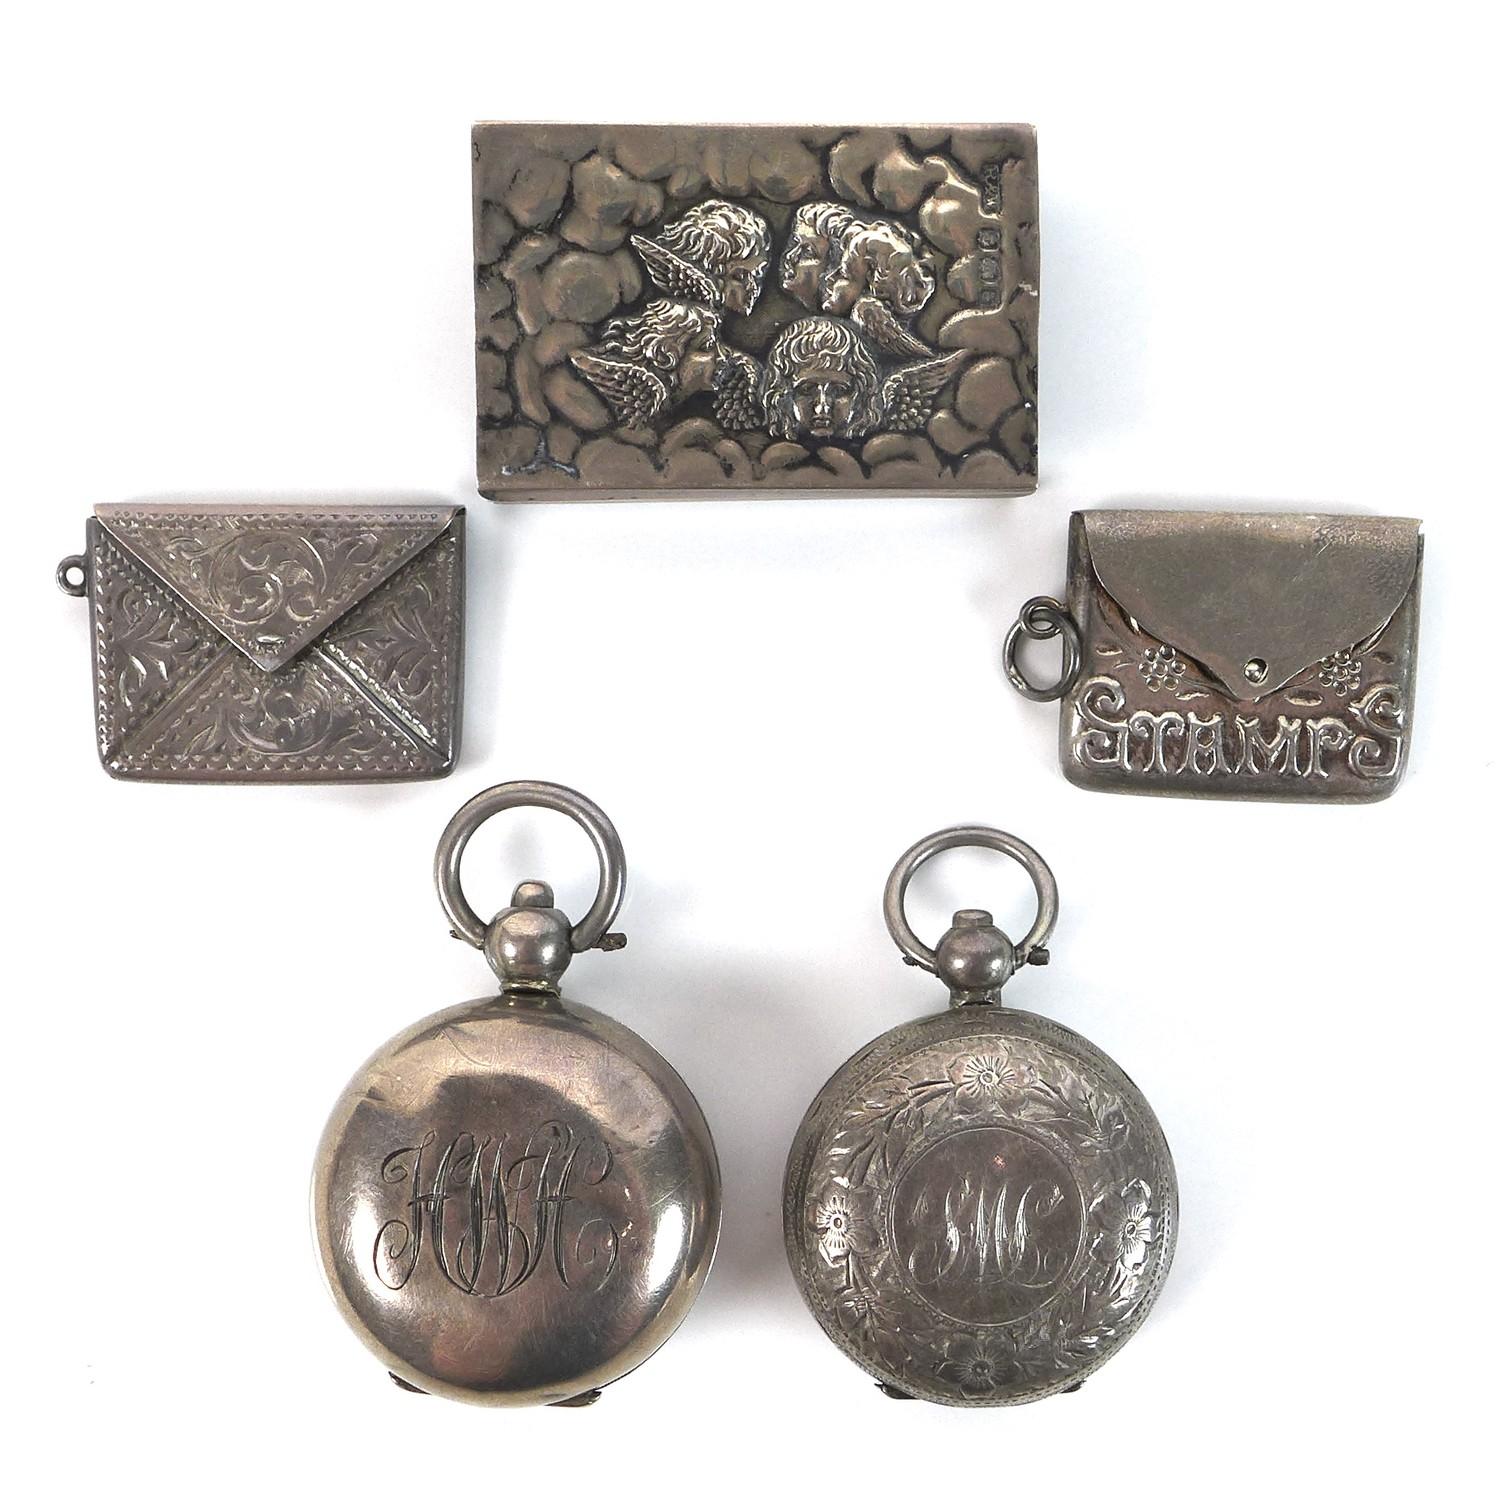 A group of Edwardian silver vertu items, comprising two sovereign holders, two stamp holders, and